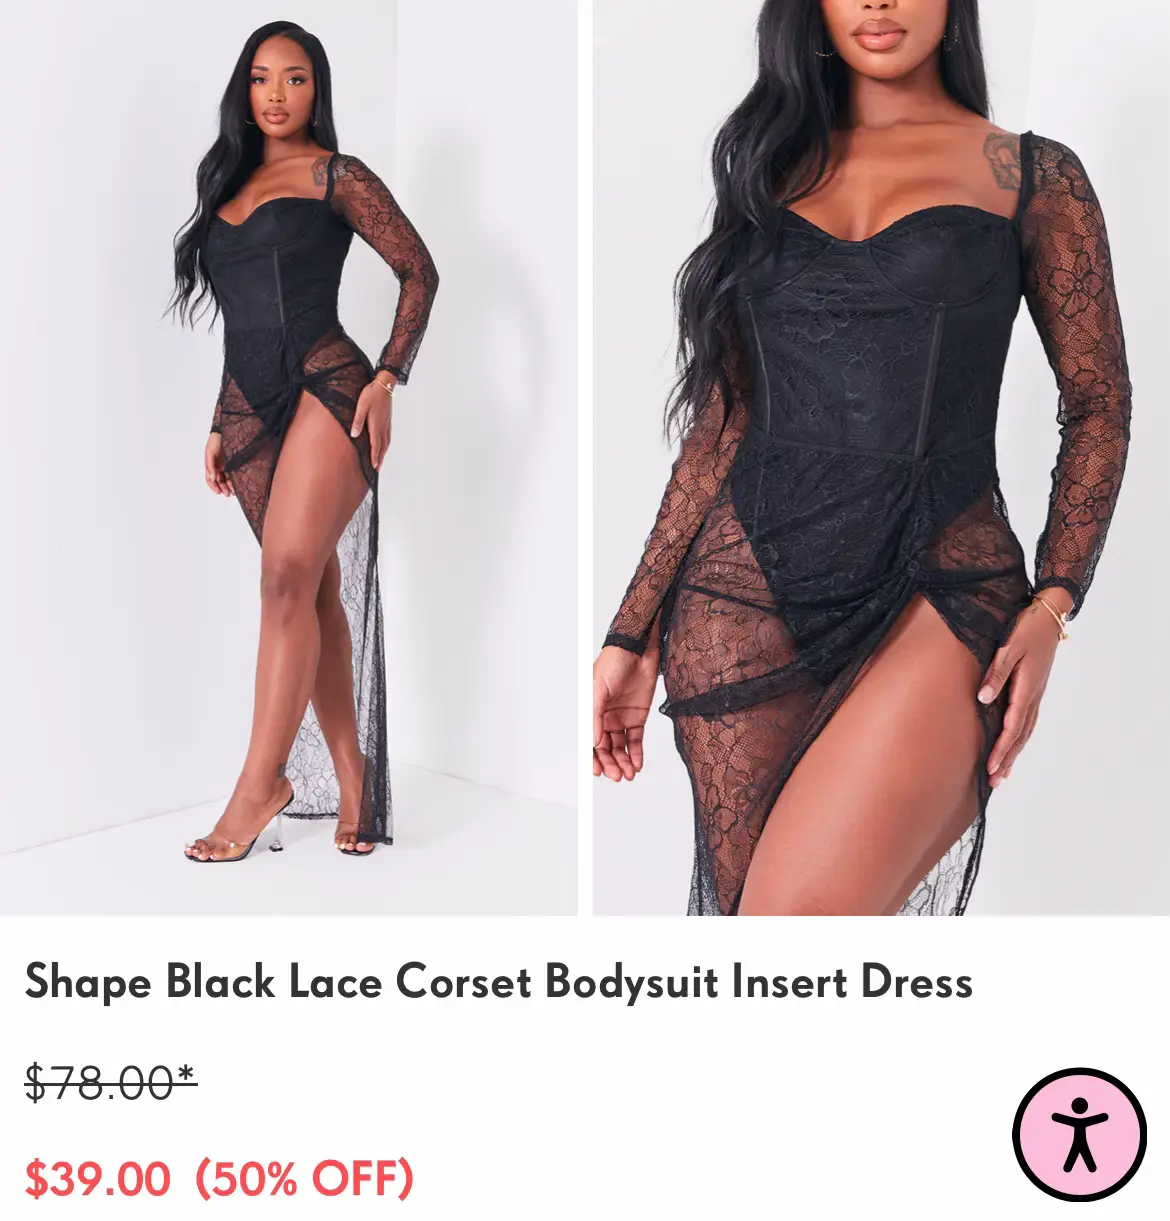 WOLFORD BODY SUIT DUPE🤍, Gallery posted by Ashlei Jarrett